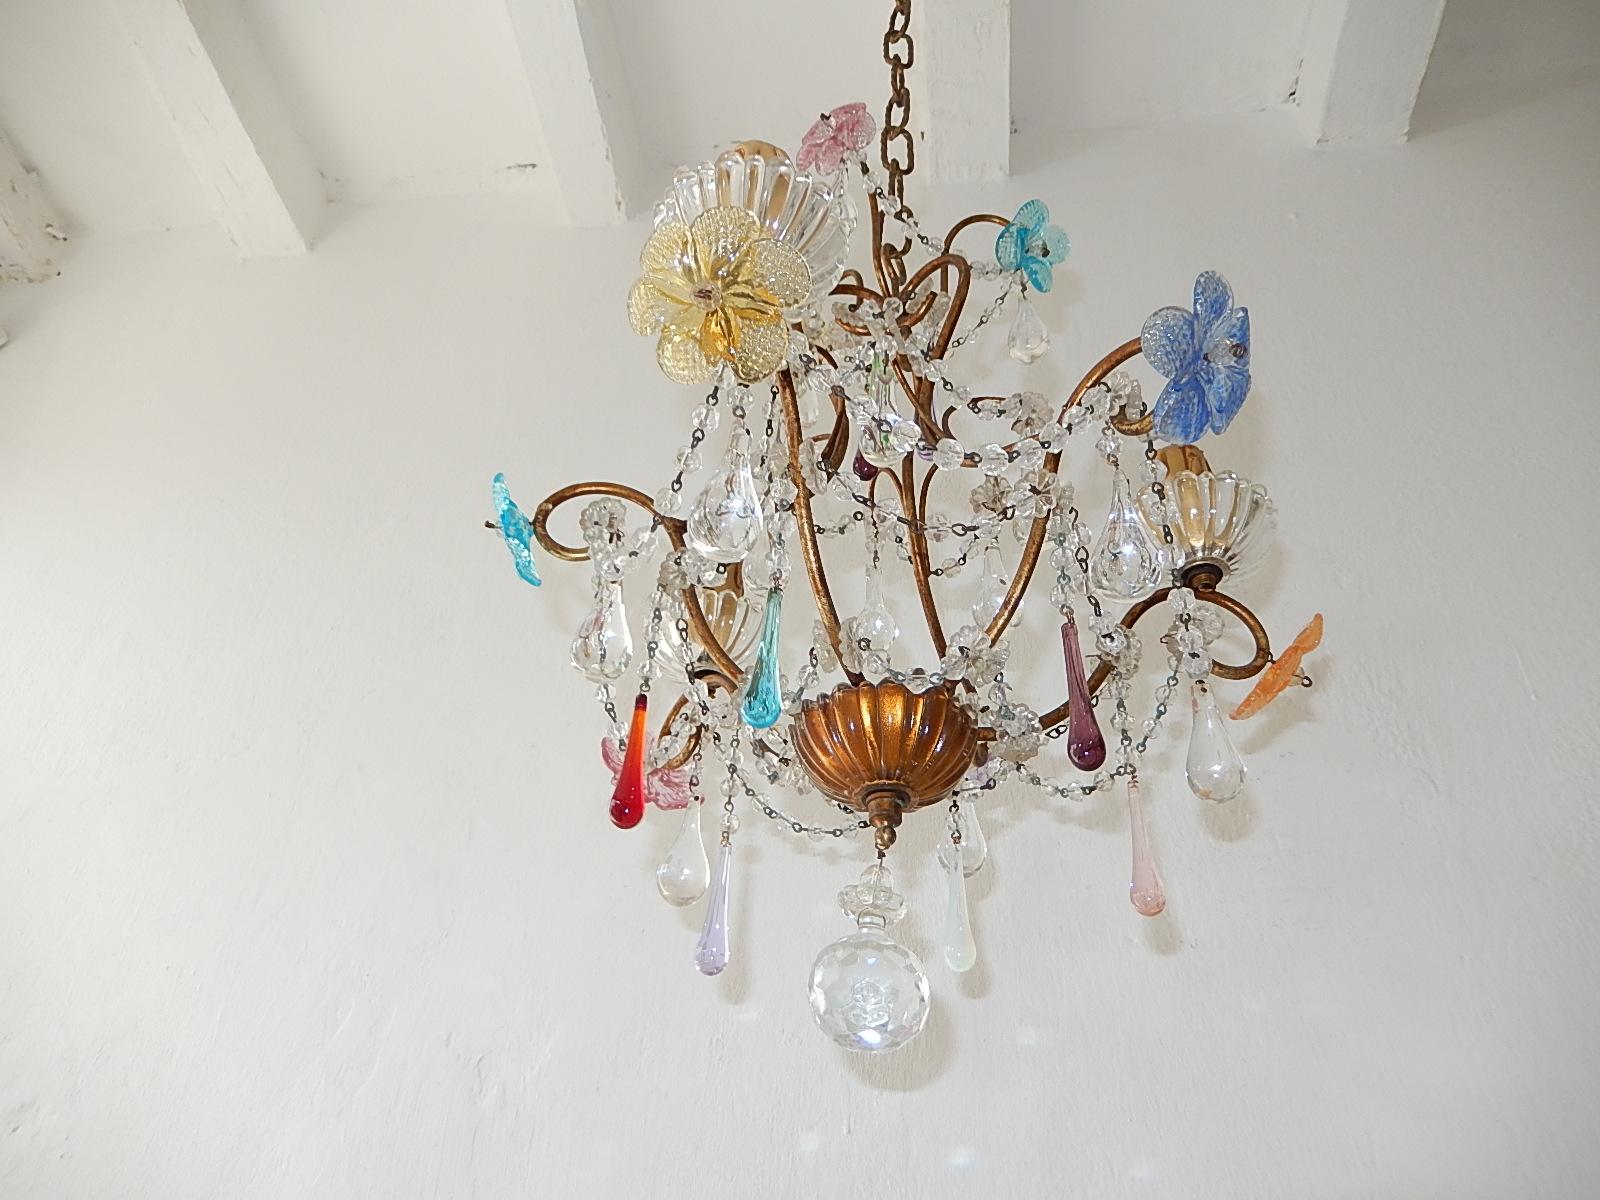 Housing 3-light, sitting in rare crystal bobeches. Will be rewired with appropriate sockets for country and ready to hang. Crystal ball swags throughout. Adorning pink, orange, yellow and blue Murano flowers colorful Murano drops to match. Adding 21